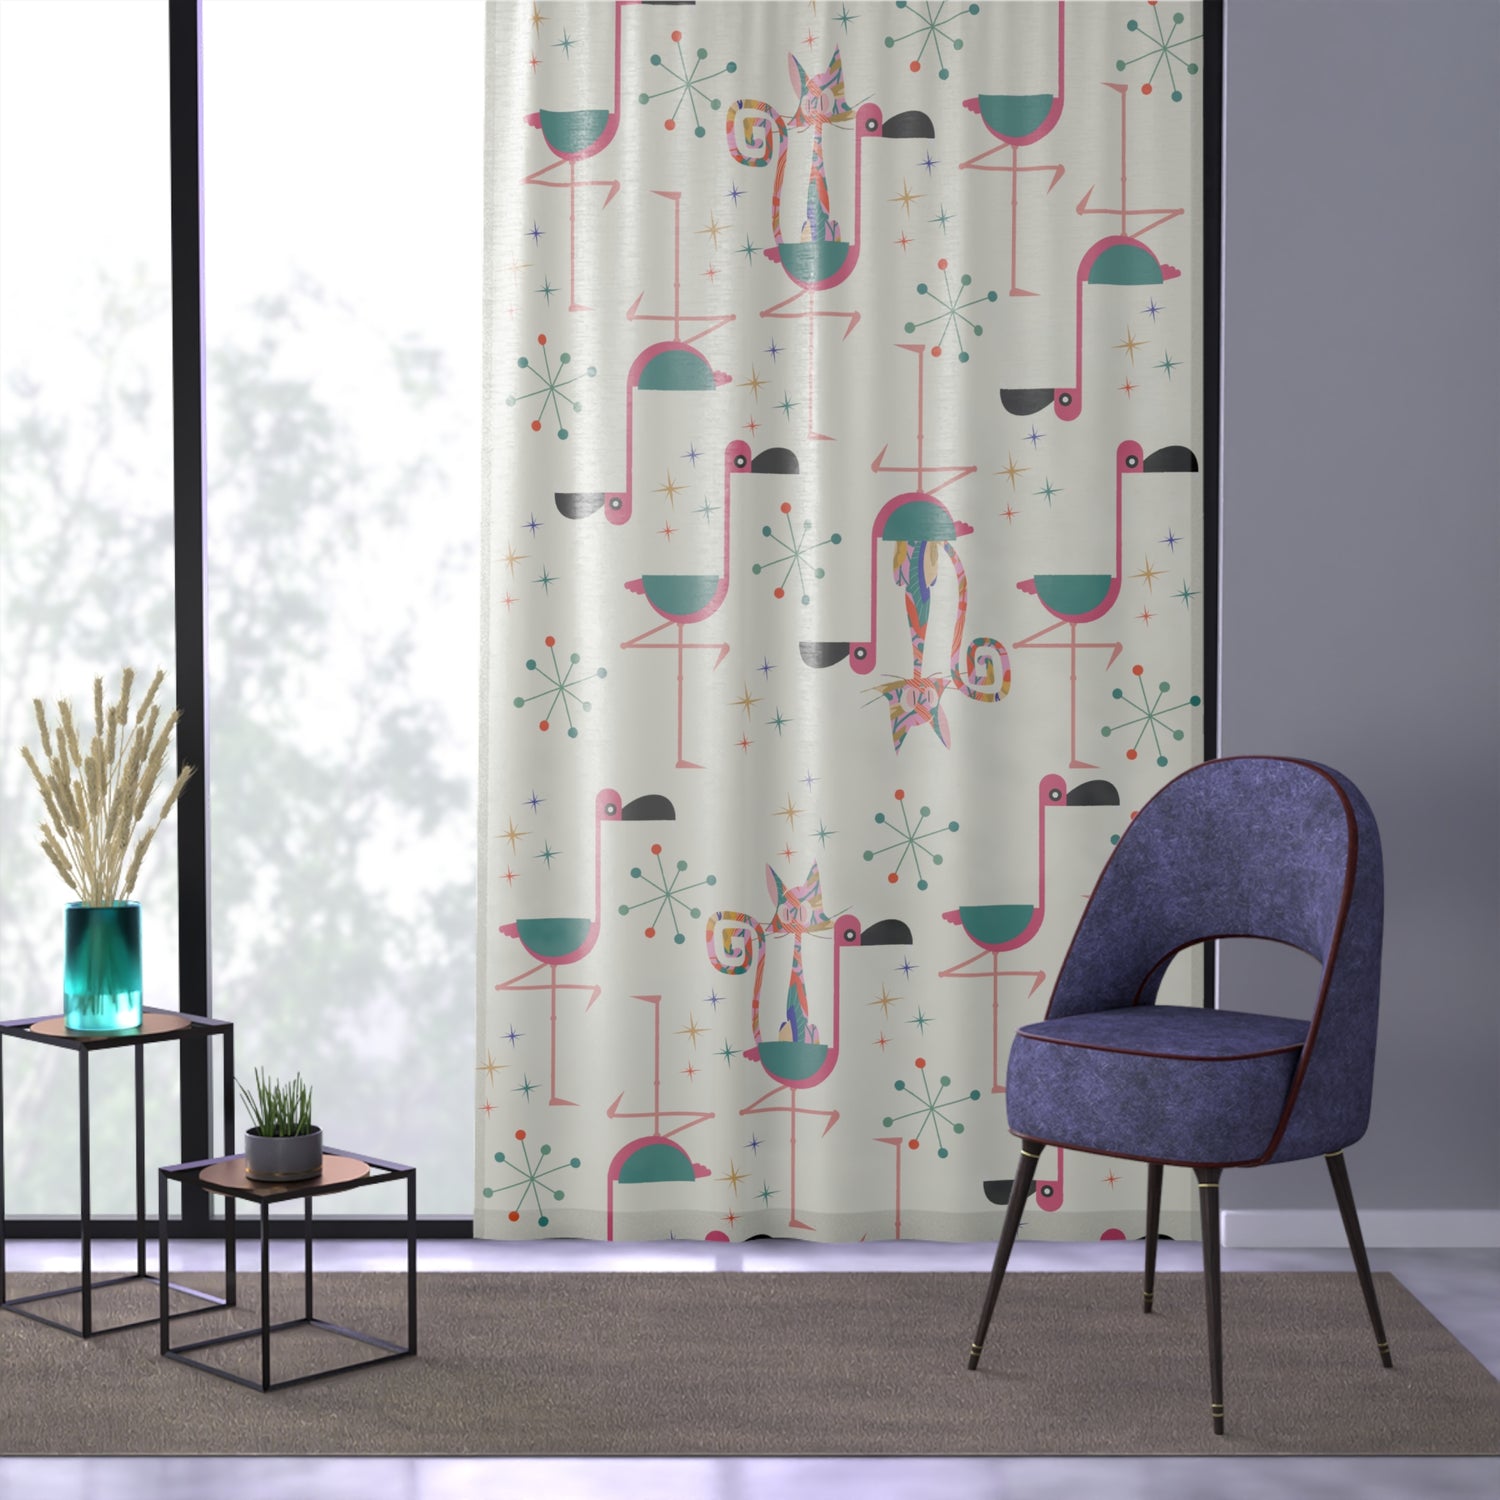 Flamingo Curtains, Palm Springs Cali Style, Quirky Kitschy Atomic Cat, Retro Sheer Window Curtain